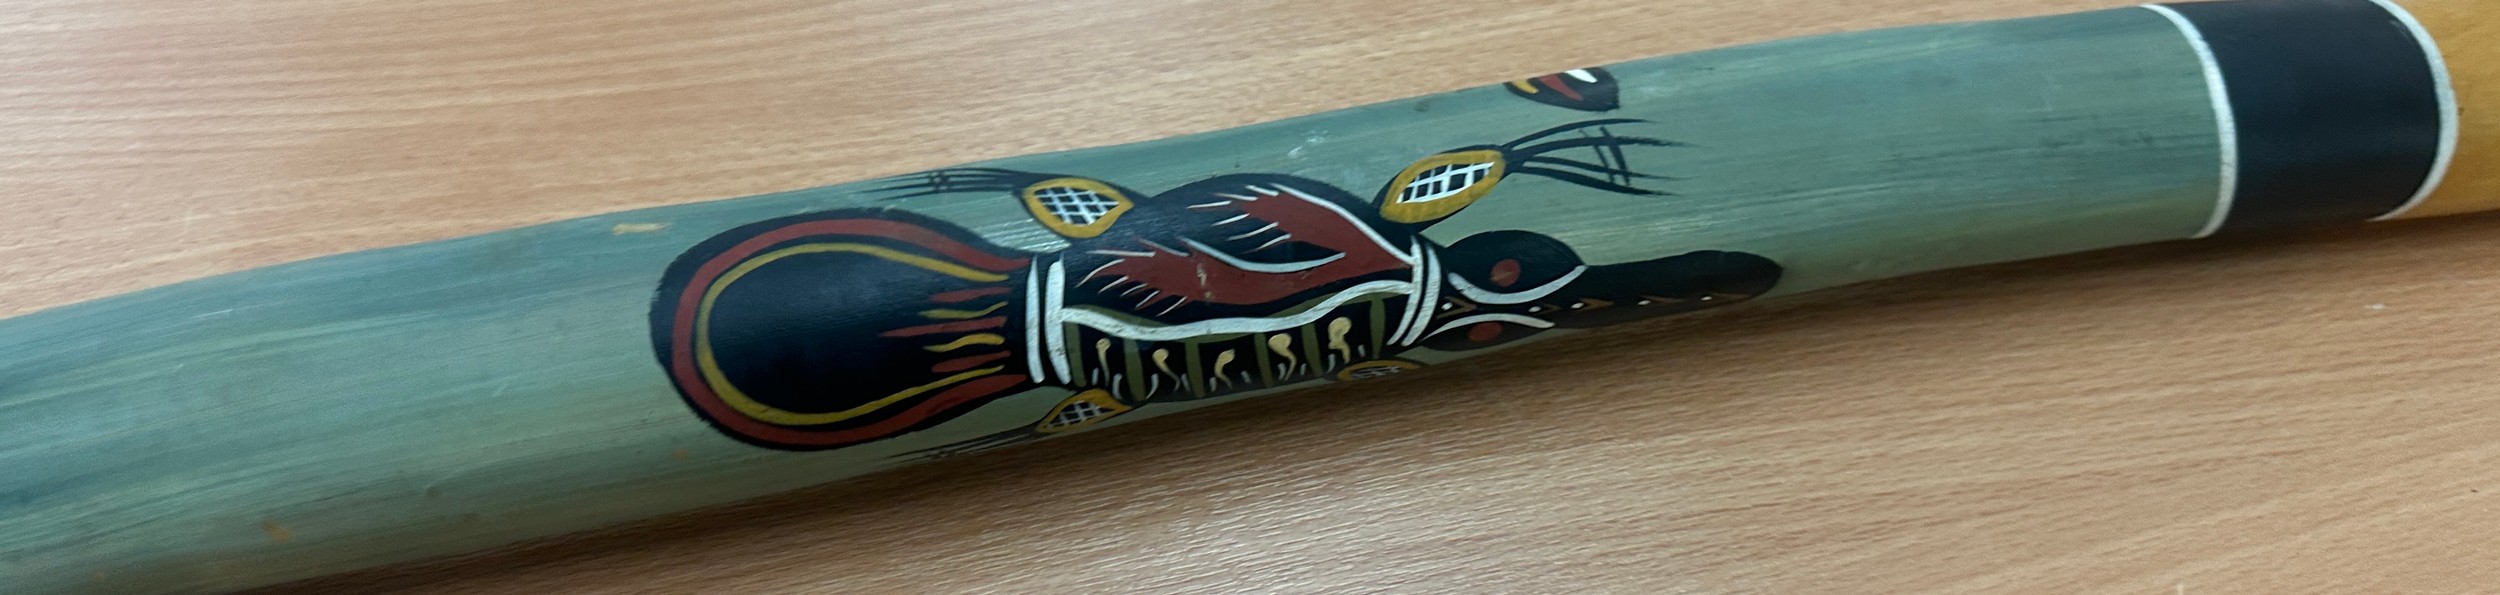 Vintage Didgeridoo, length approximately 45 inches - Image 2 of 2